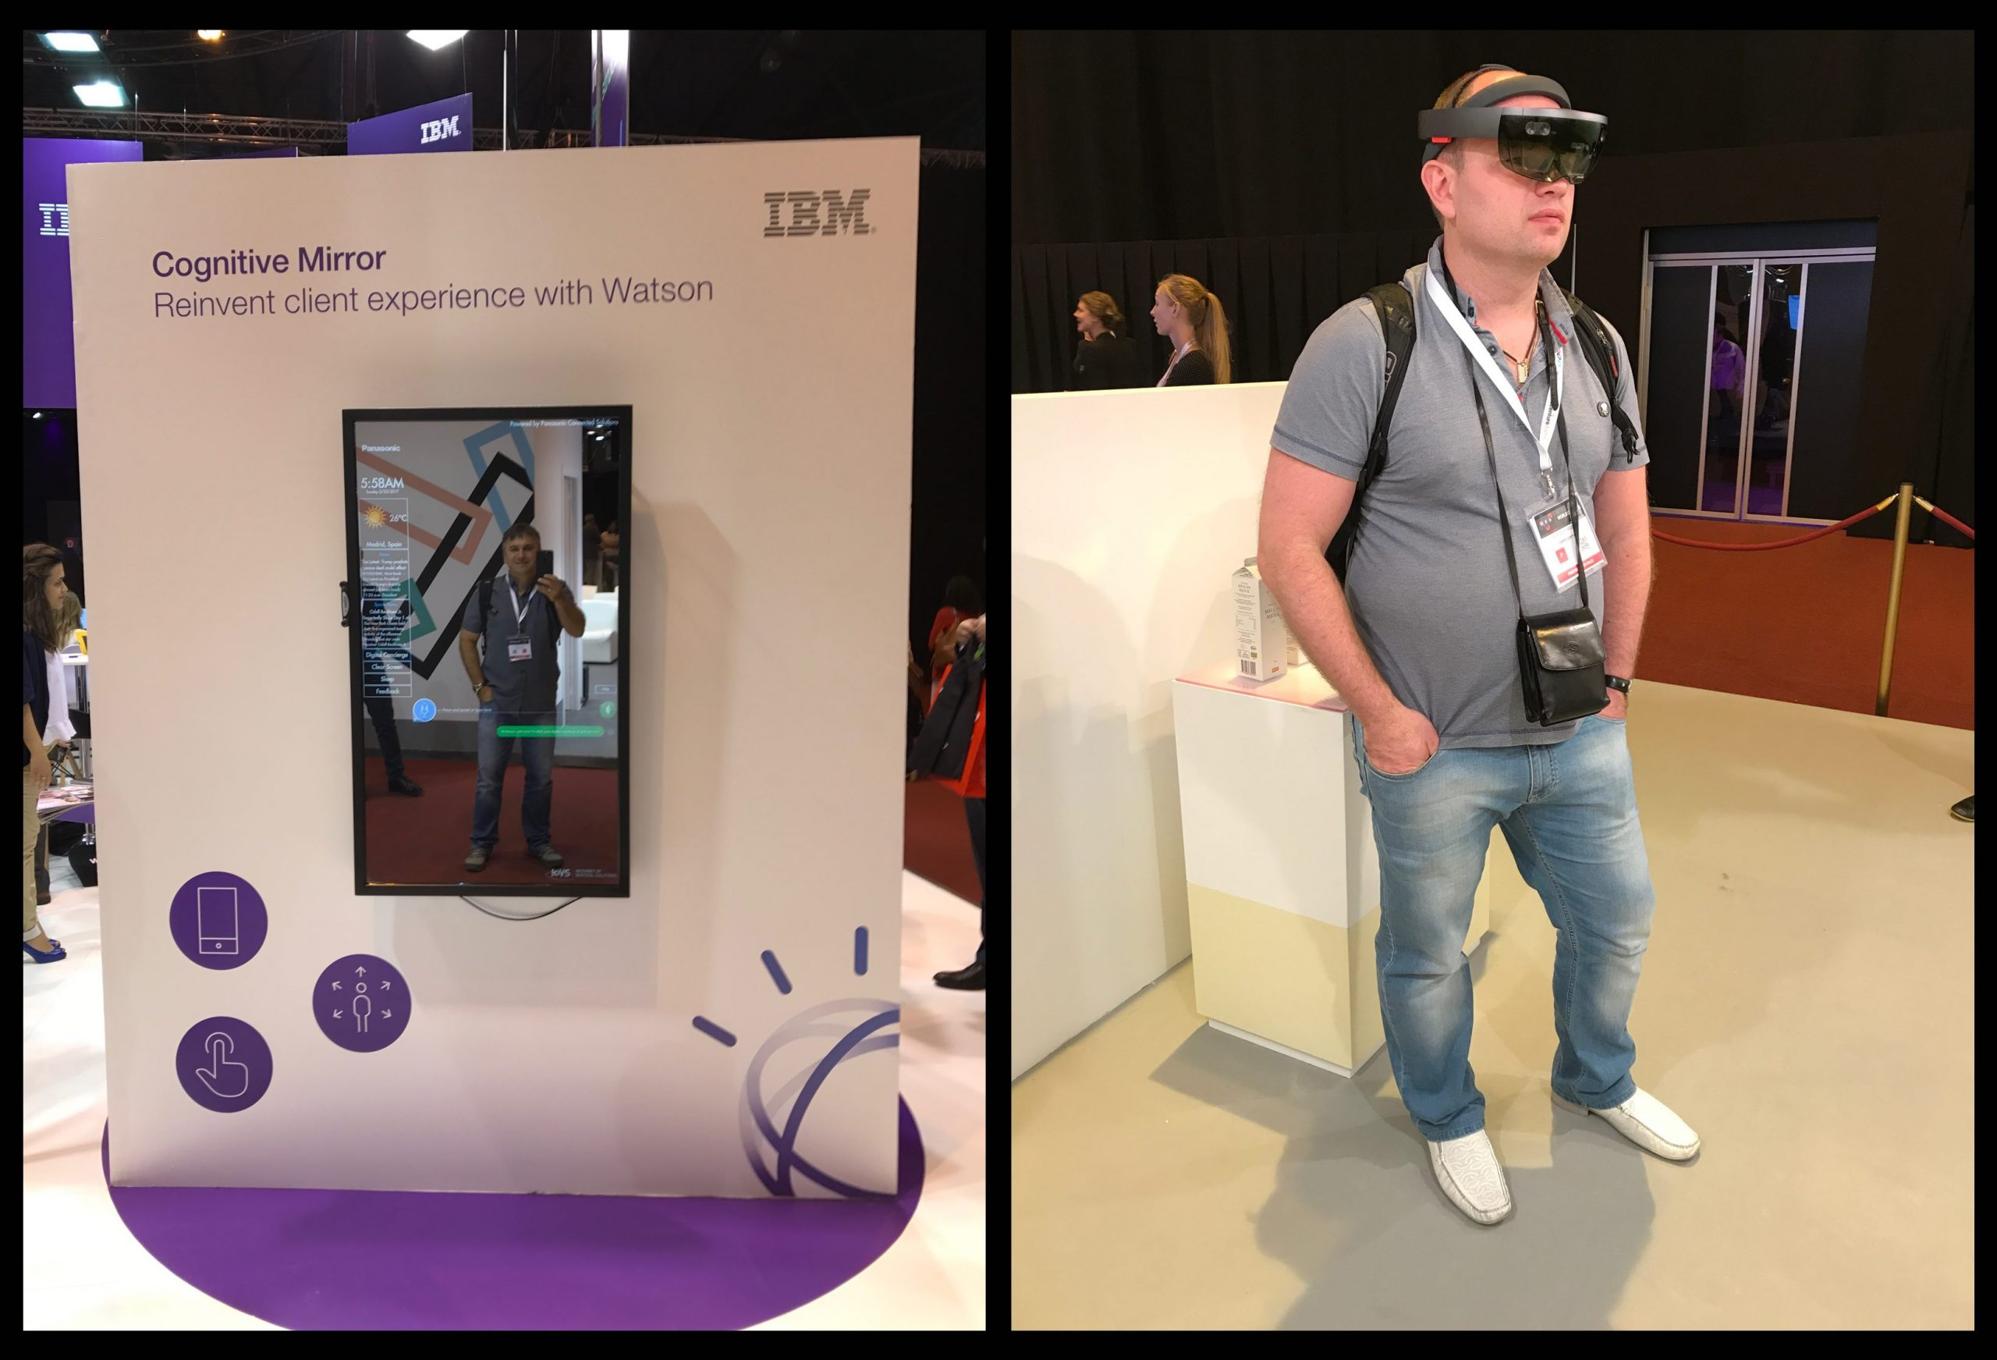 Experiencing VR and cognitive mirror